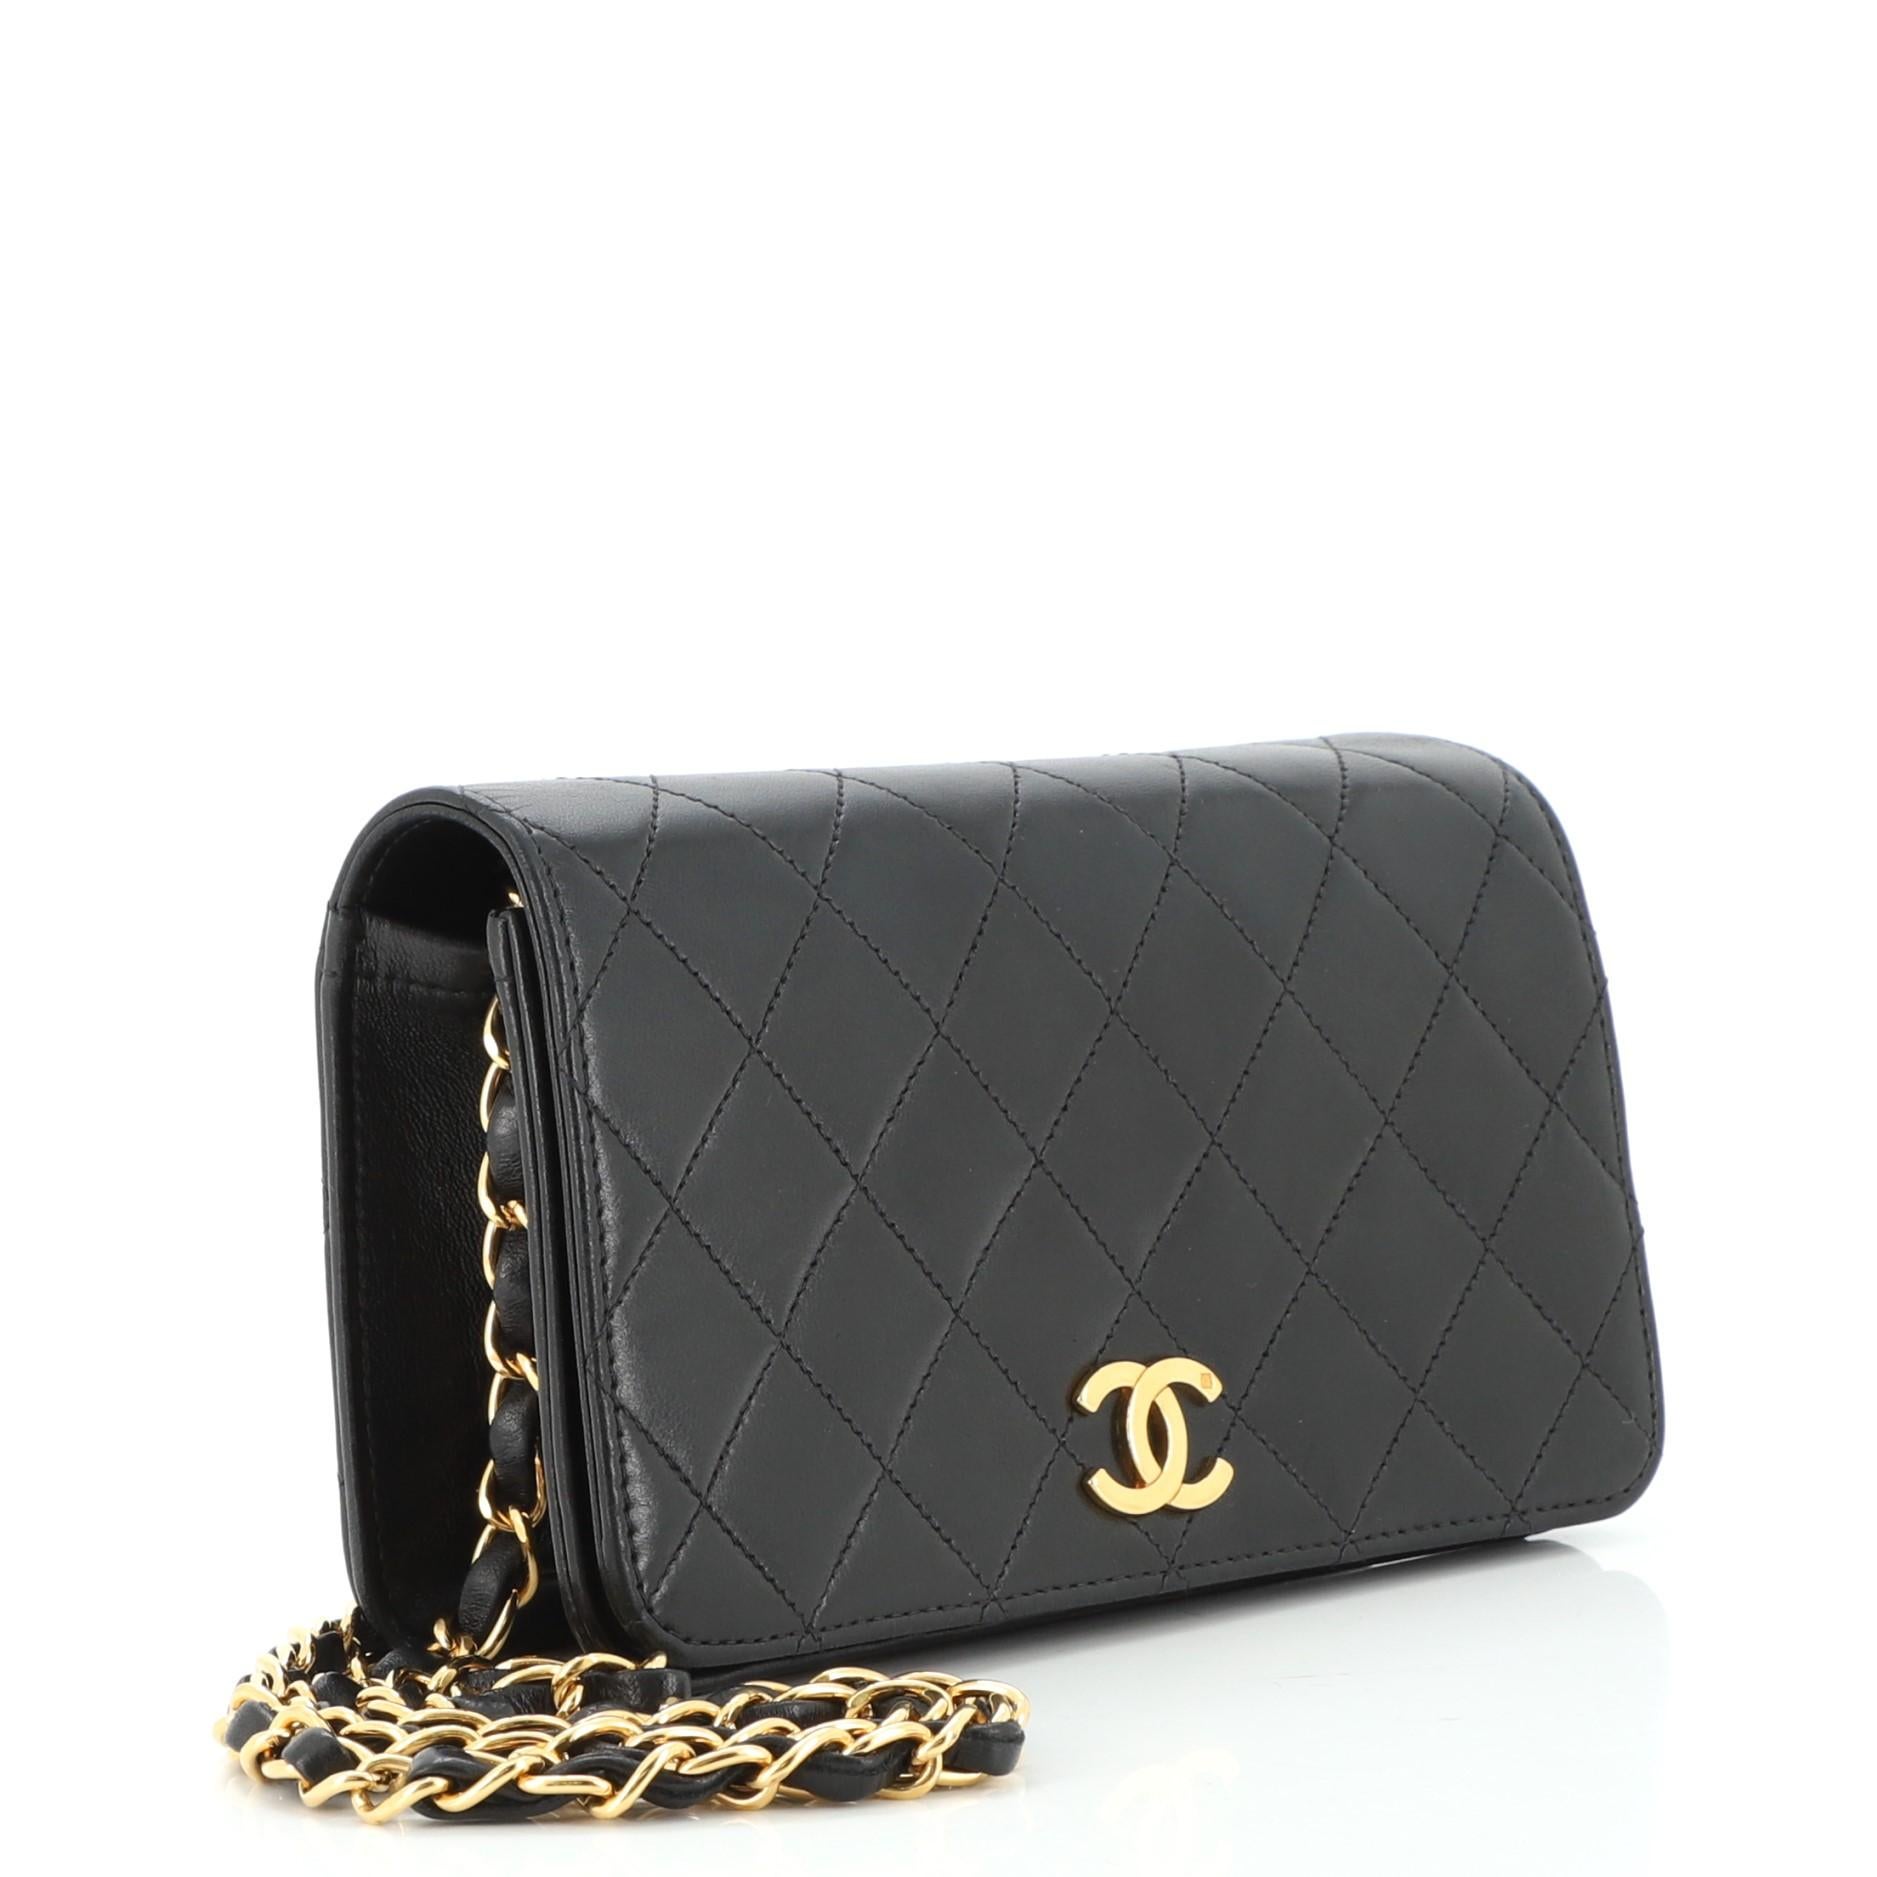 Black Chanel Vintage Full Flap Bag Quilted Lambskin Mini